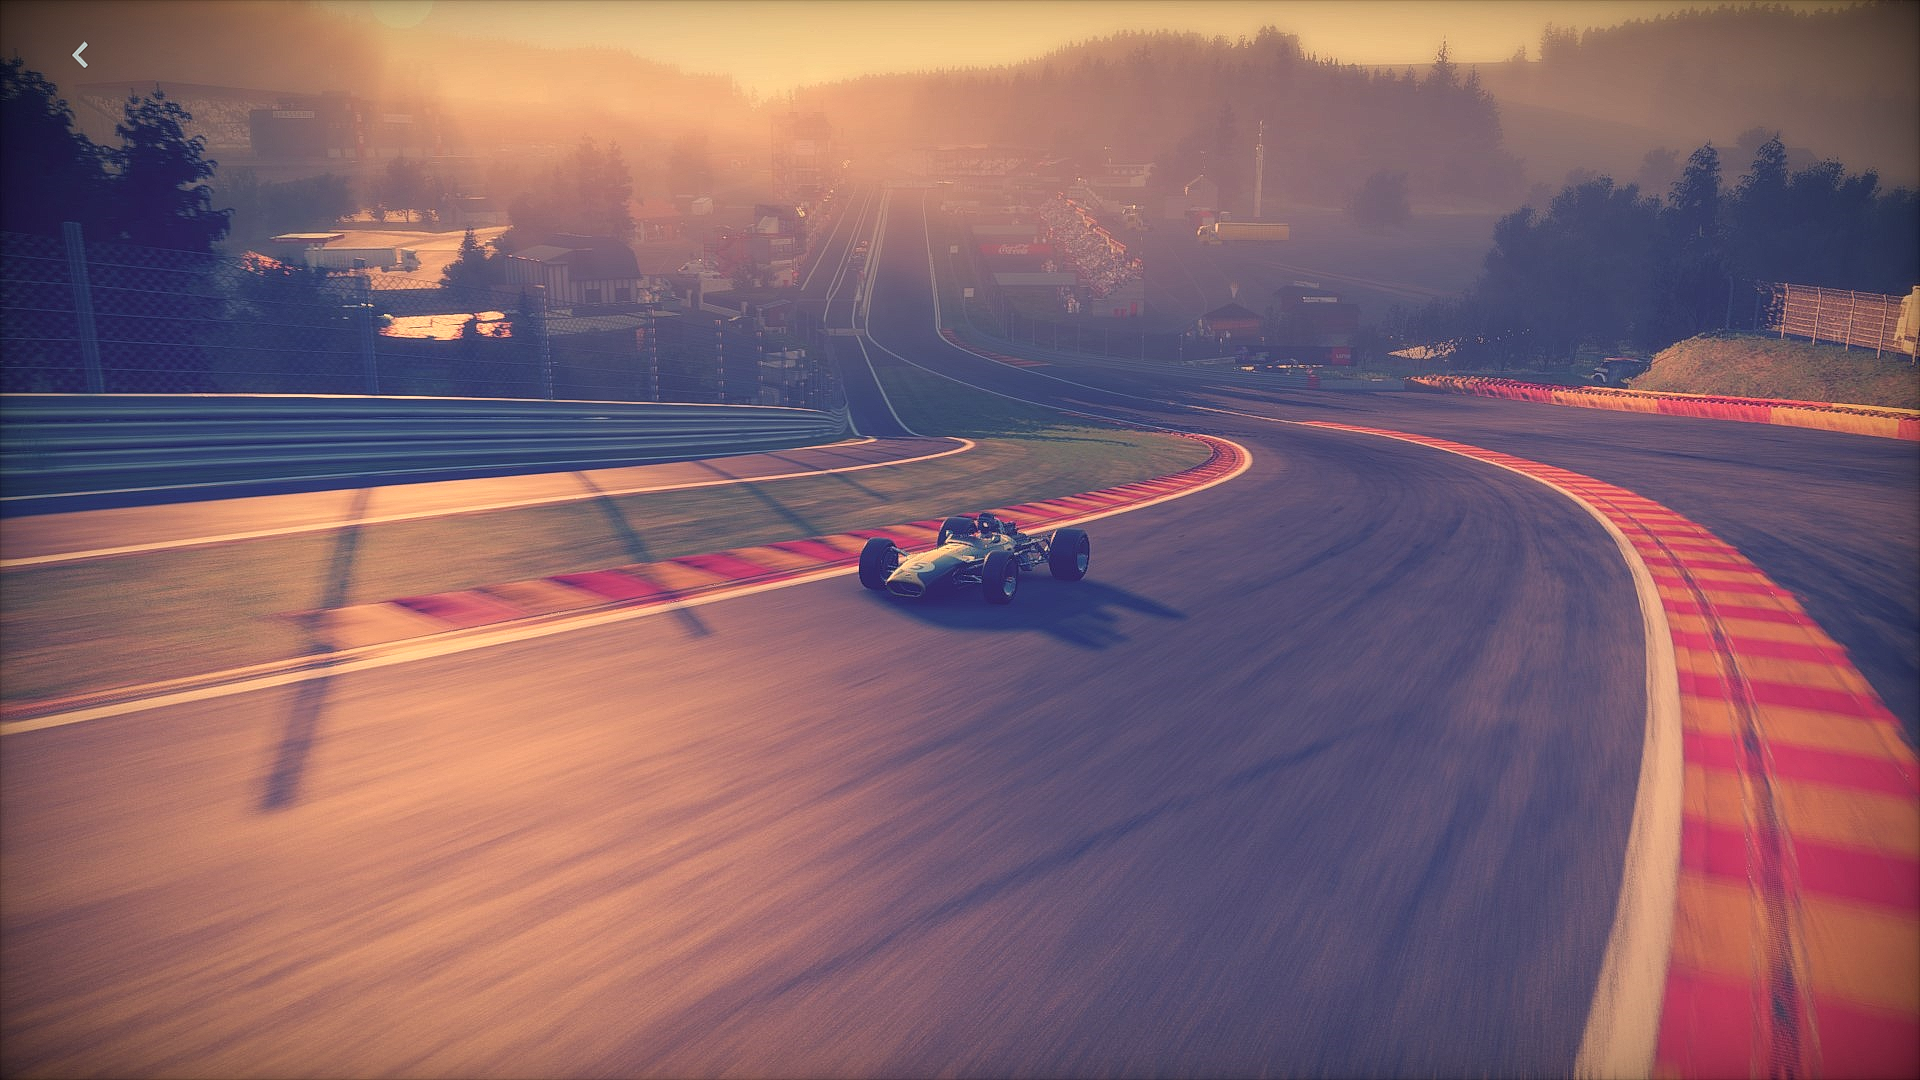 General 1920x1080 Spa-Francorchamps 1968 Lotus 49 Project cars race tracks video games PC gaming sport motorsport vehicle racing screen shot